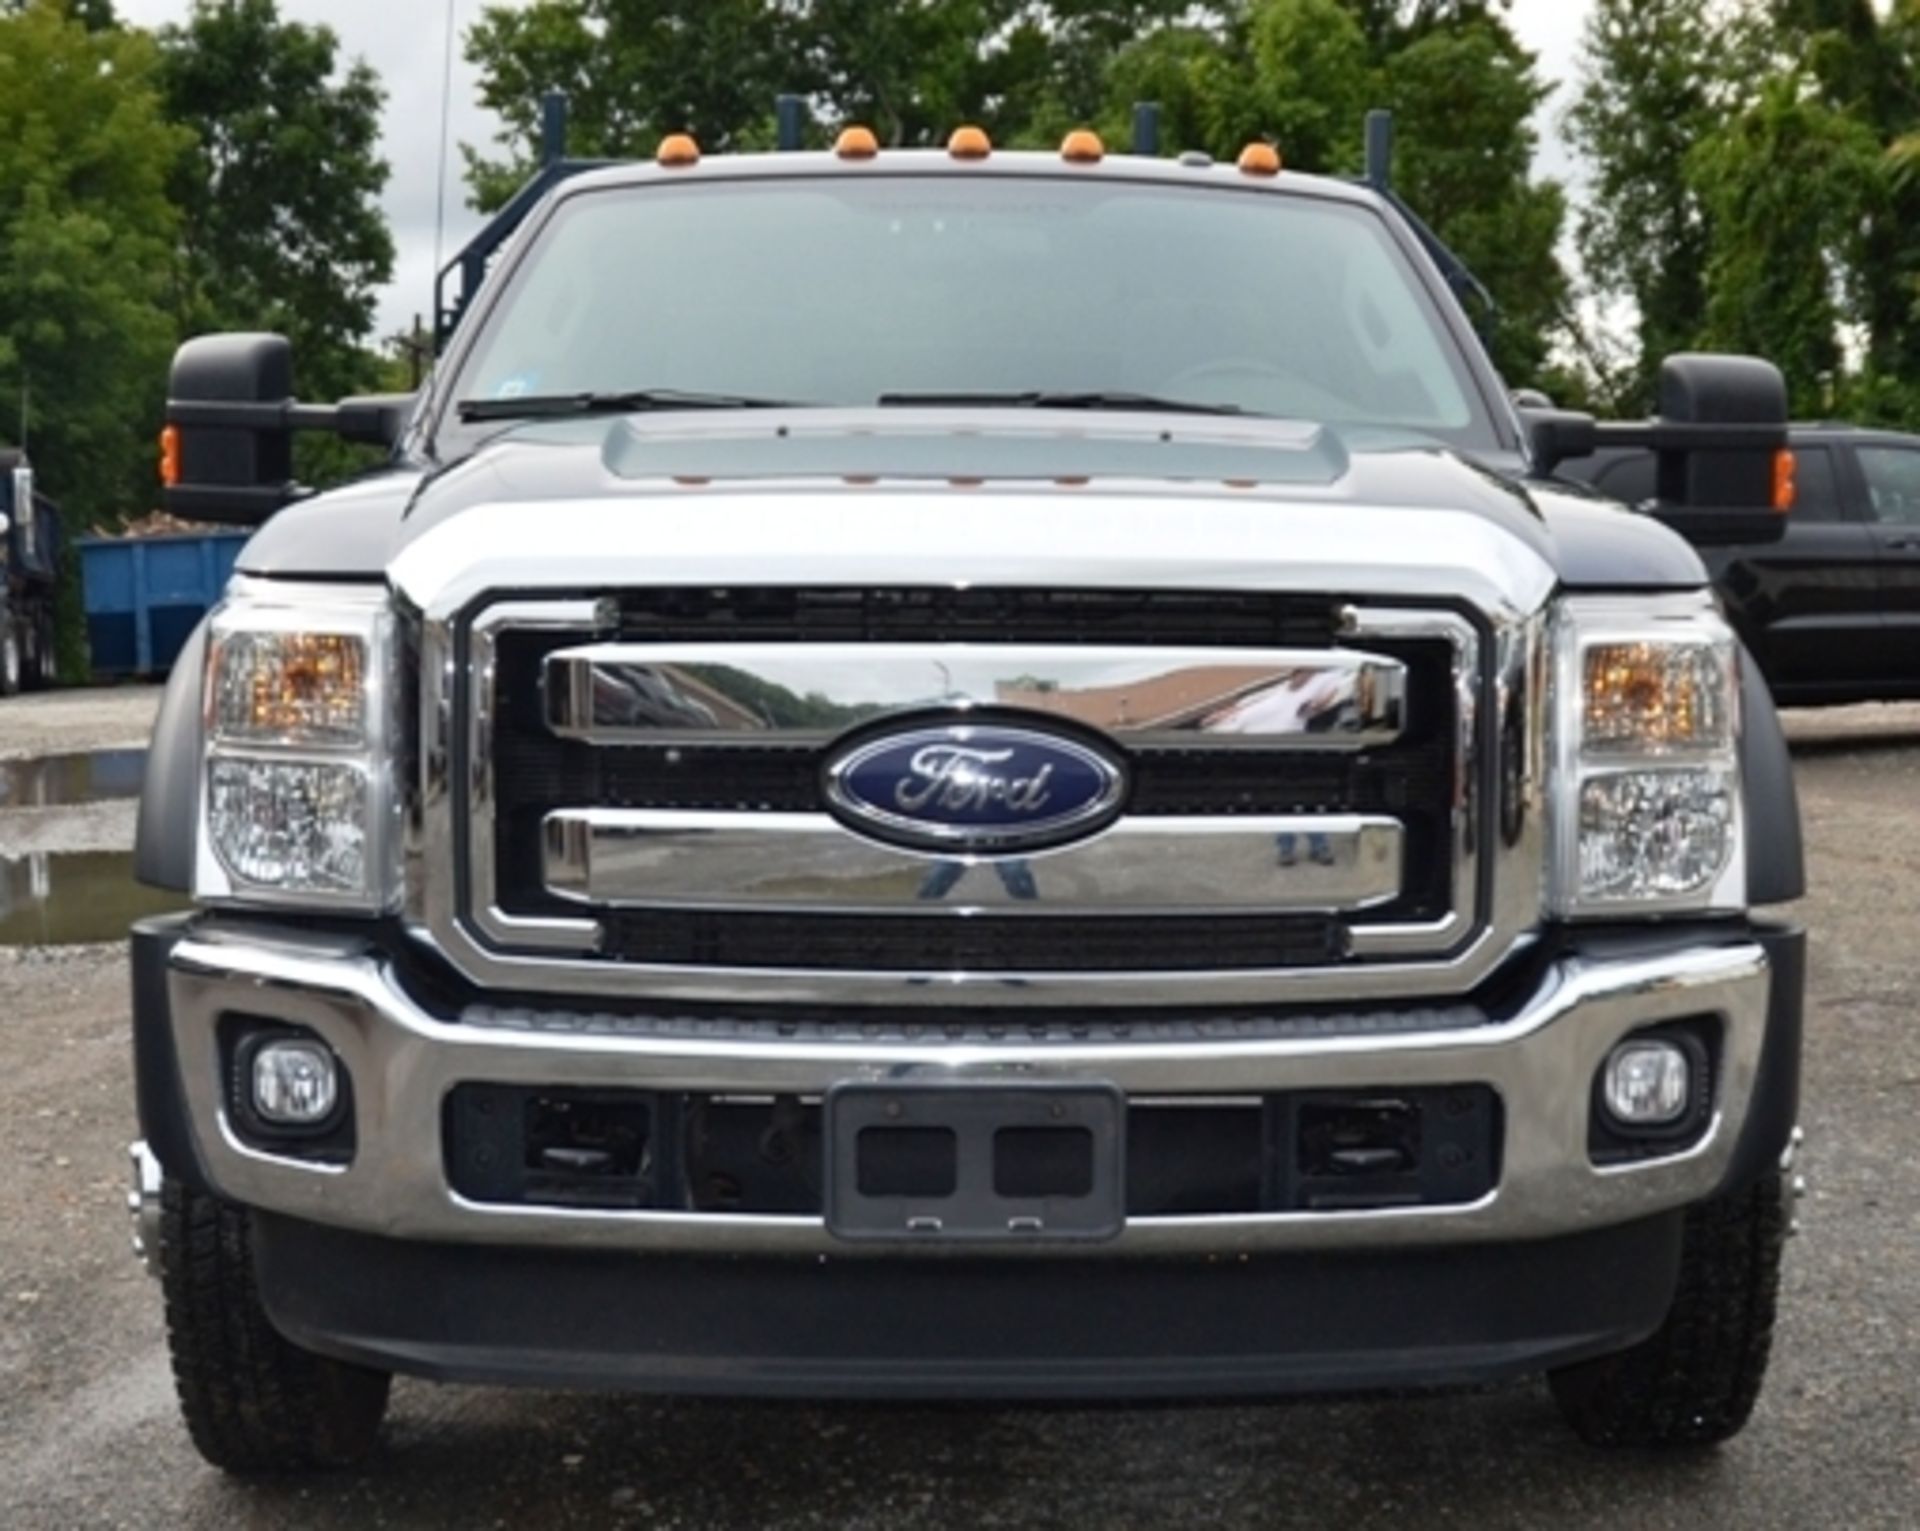 2014 Ford F-550, Supercab, XLT, 12' Bed, Liftgate, 4X4 - 34,865 Miles - Image 2 of 5